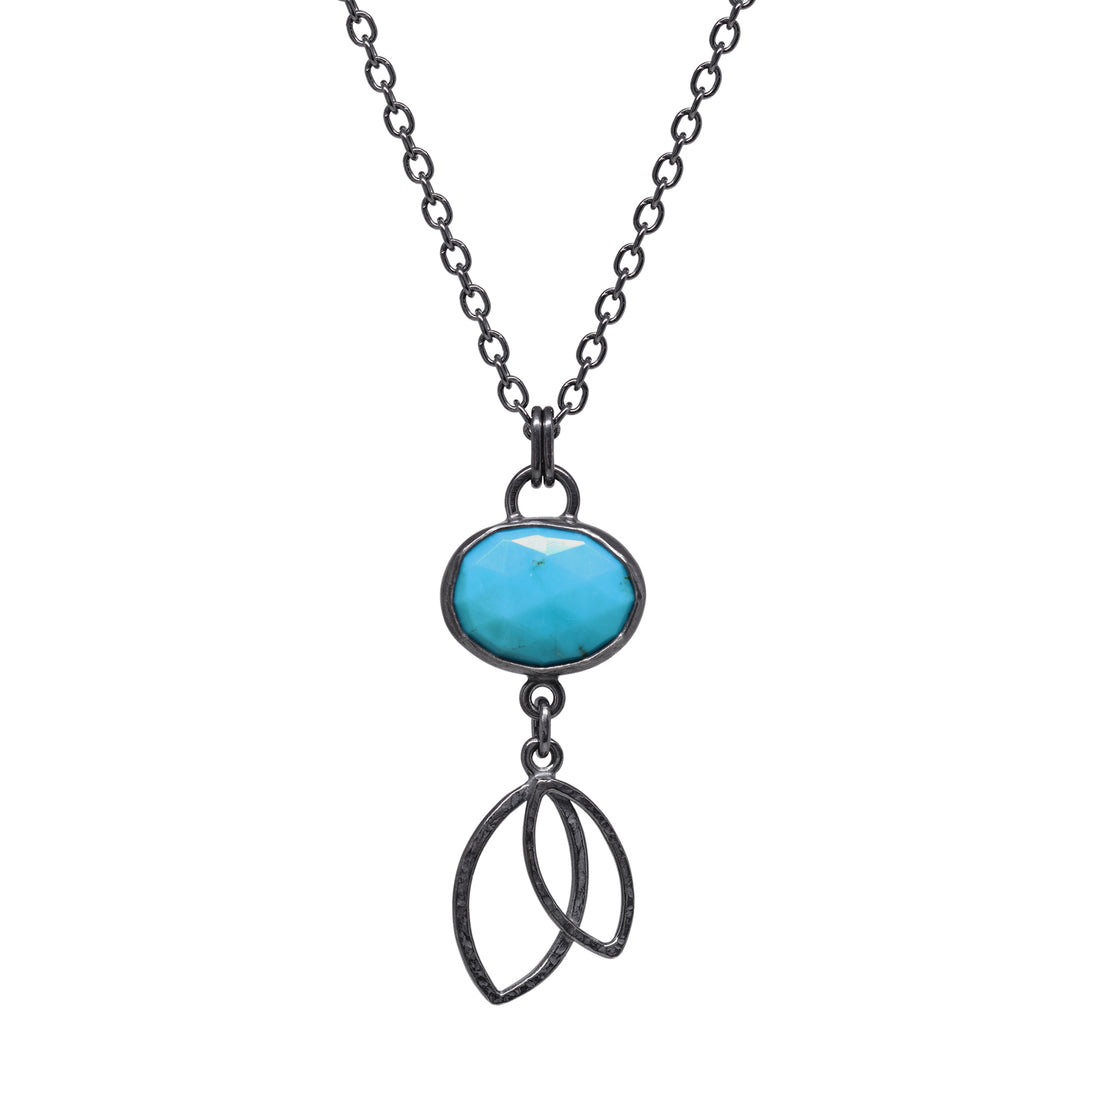 Double Leaf Necklace Small - Turquoise - Dark Sterling